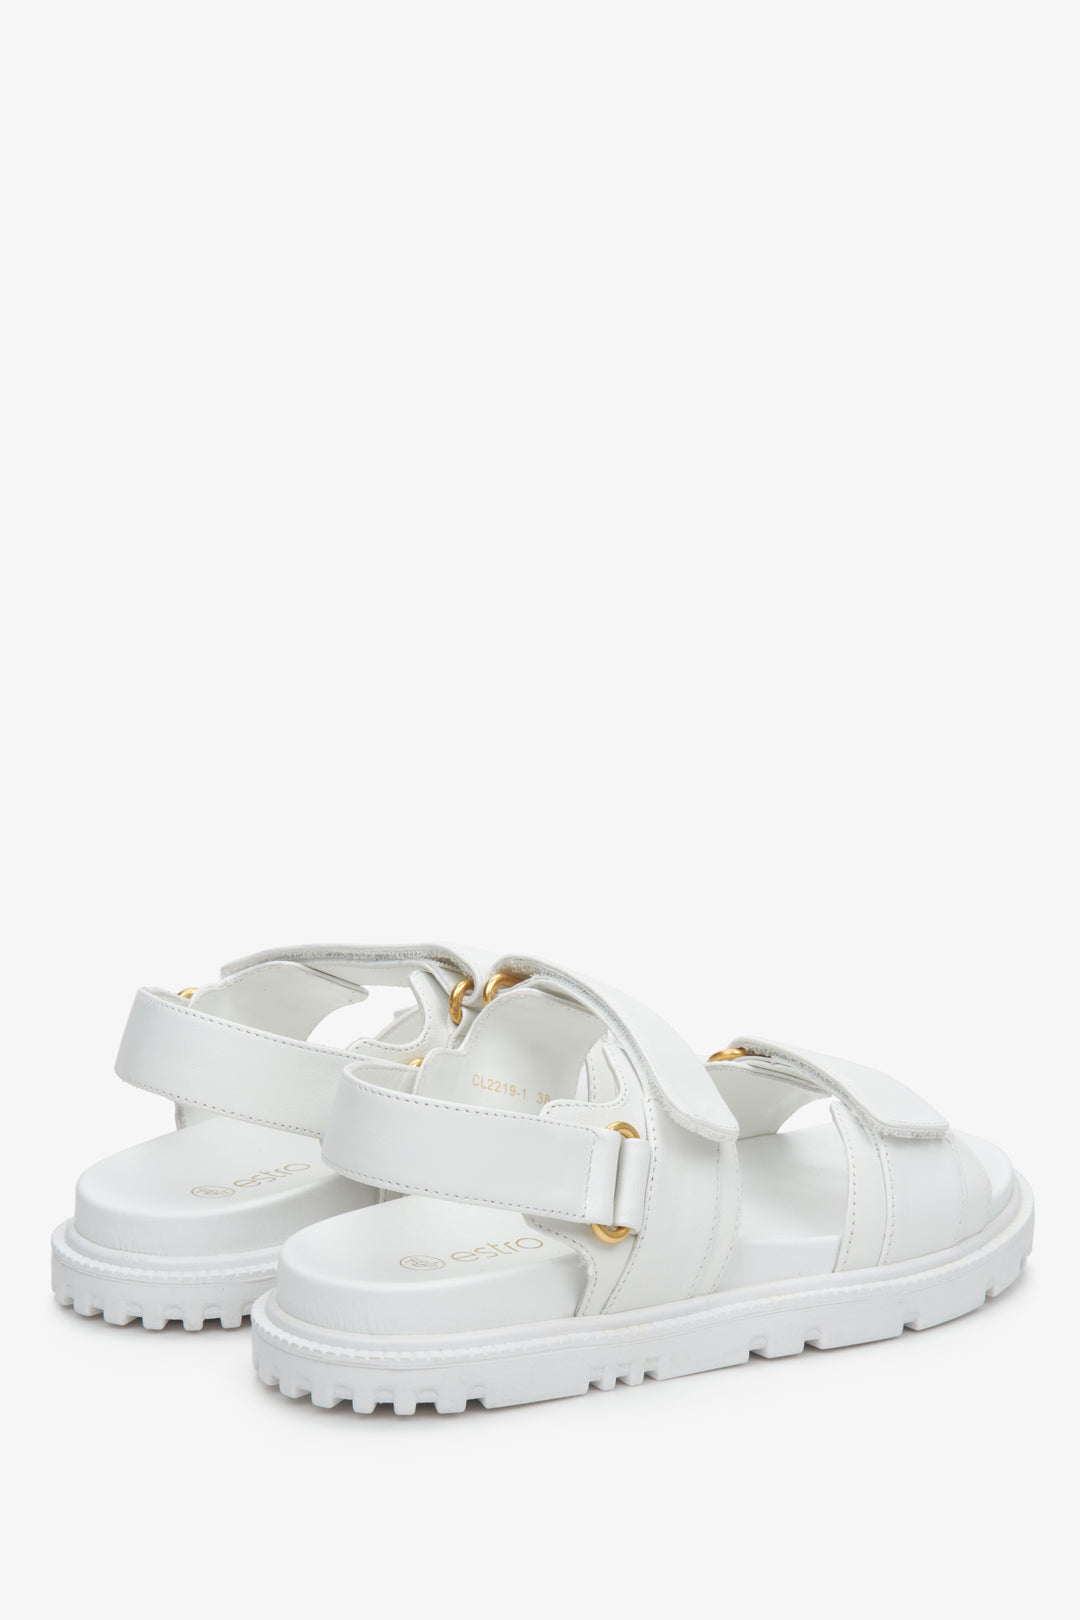 Women's white leather sandals with a soft sole and gold elements - close-up on the side and heel line.